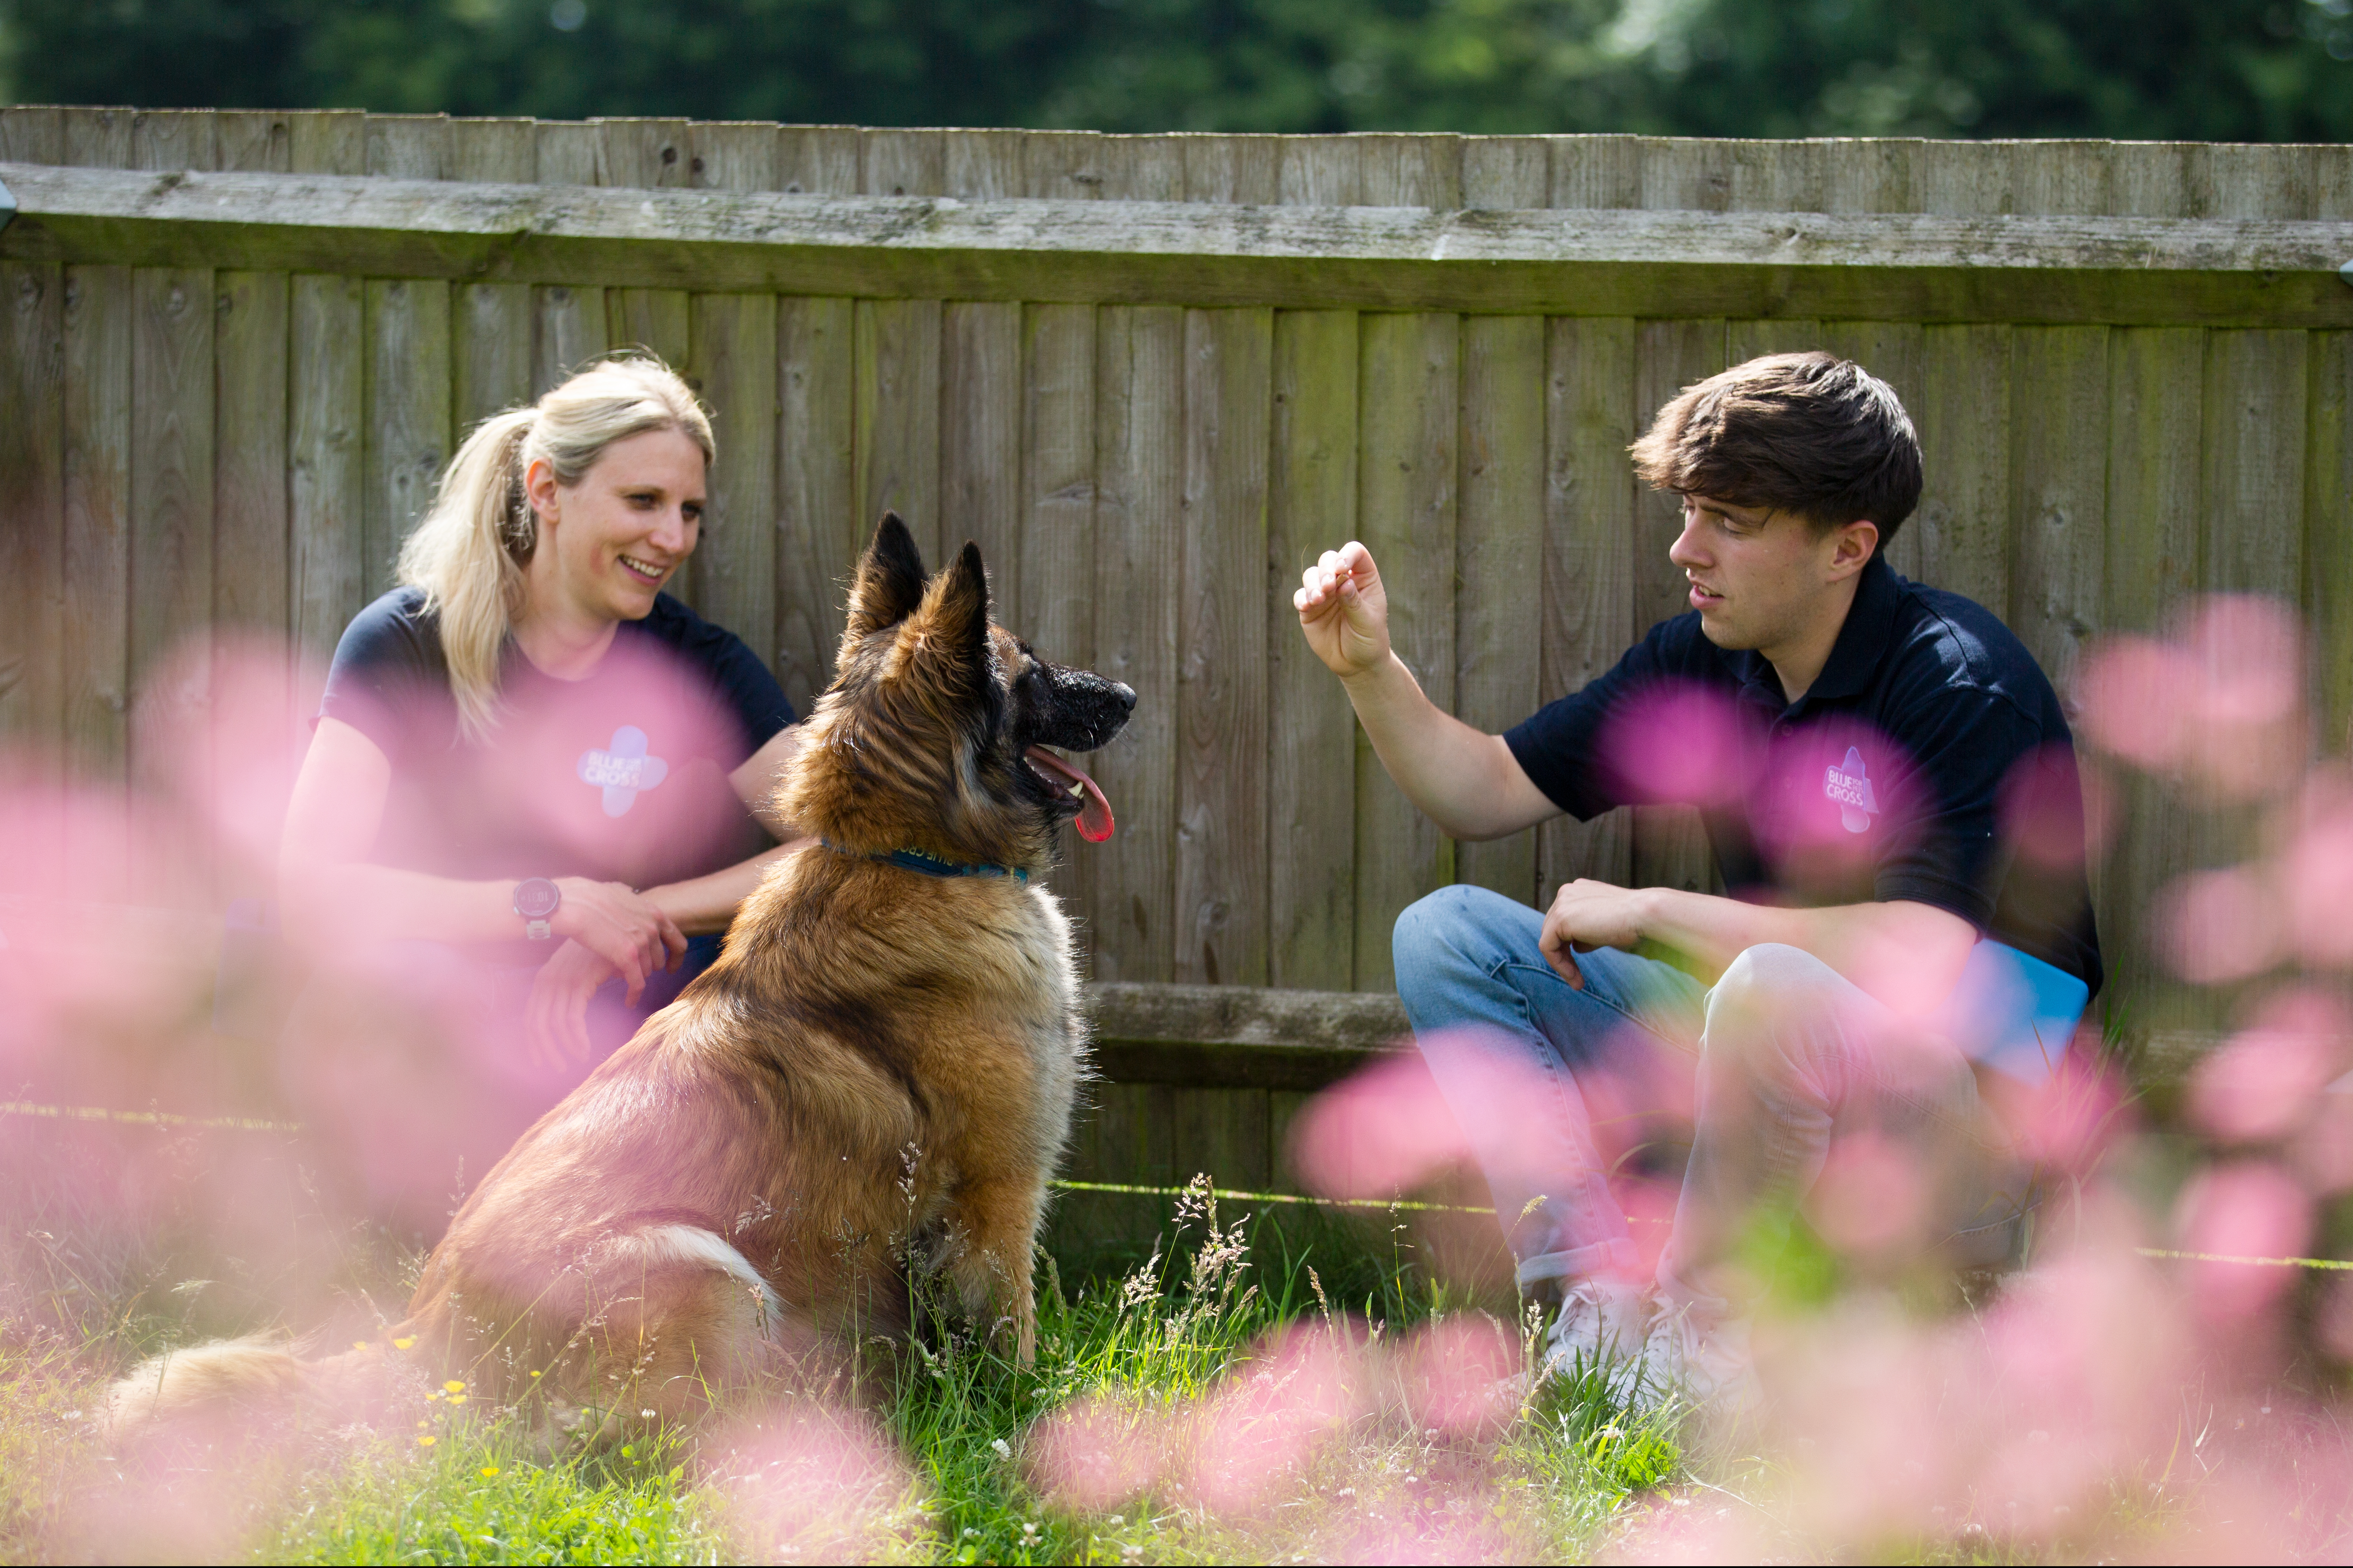 Blue Cross behaviourist Becky Skyrme and Blue Cross trainer Thomas Rainbow look towards a German shepherd dog who sits in between the pair. Thomas has his hand, containing a treat, raised as the dog sits and looks at Thomas.